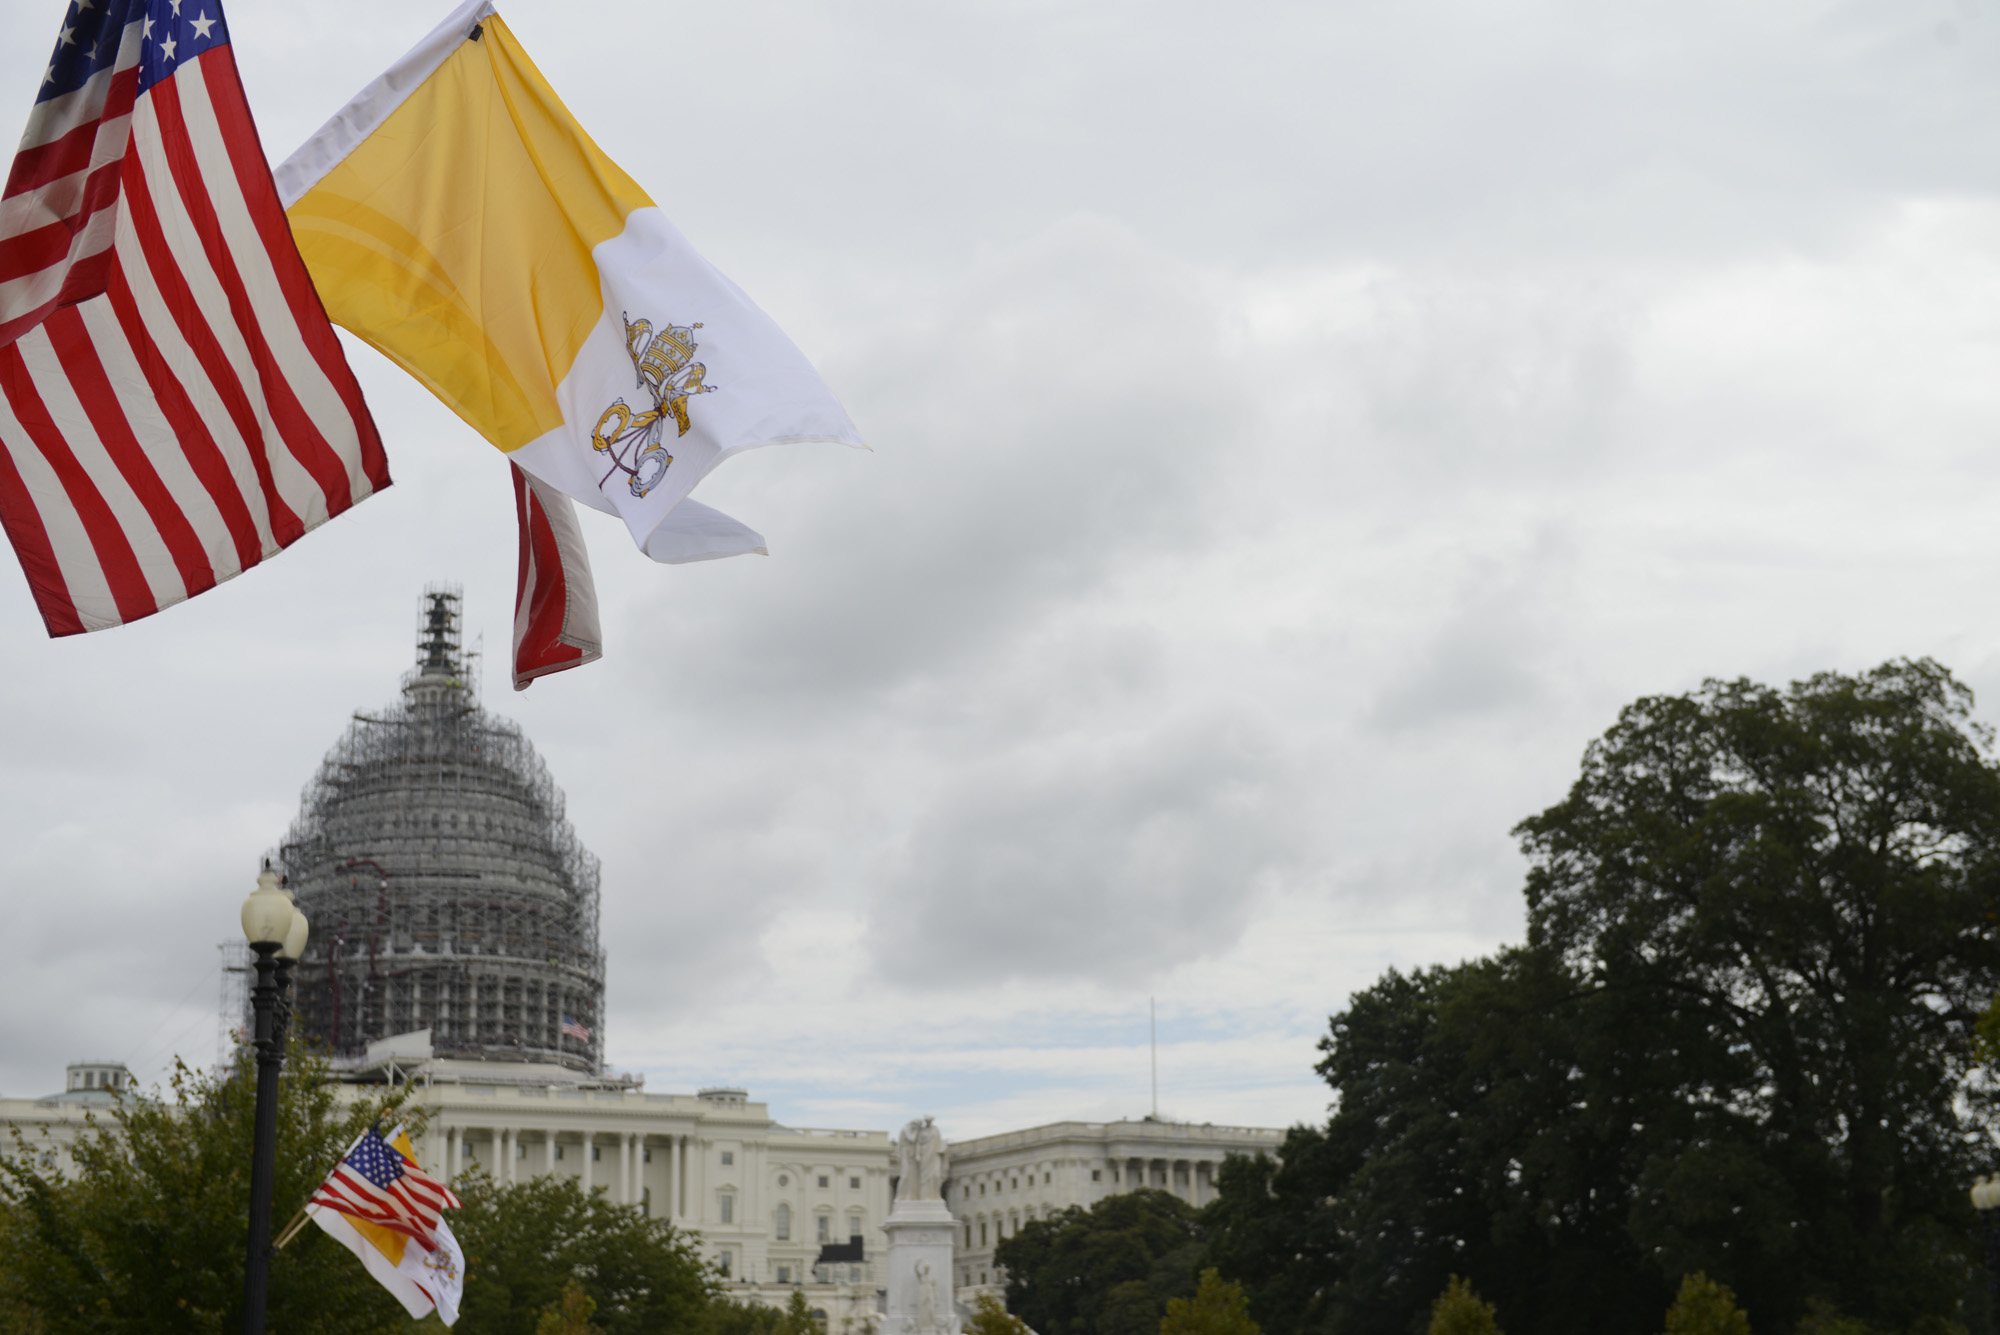 The flag of the Vatican City flies along with the U.S. flag and District of Columbia flag along Constitution Avenue outside the U.S. Capitol in Washington, D.C., Tuesday, Sept. 22, 2015.